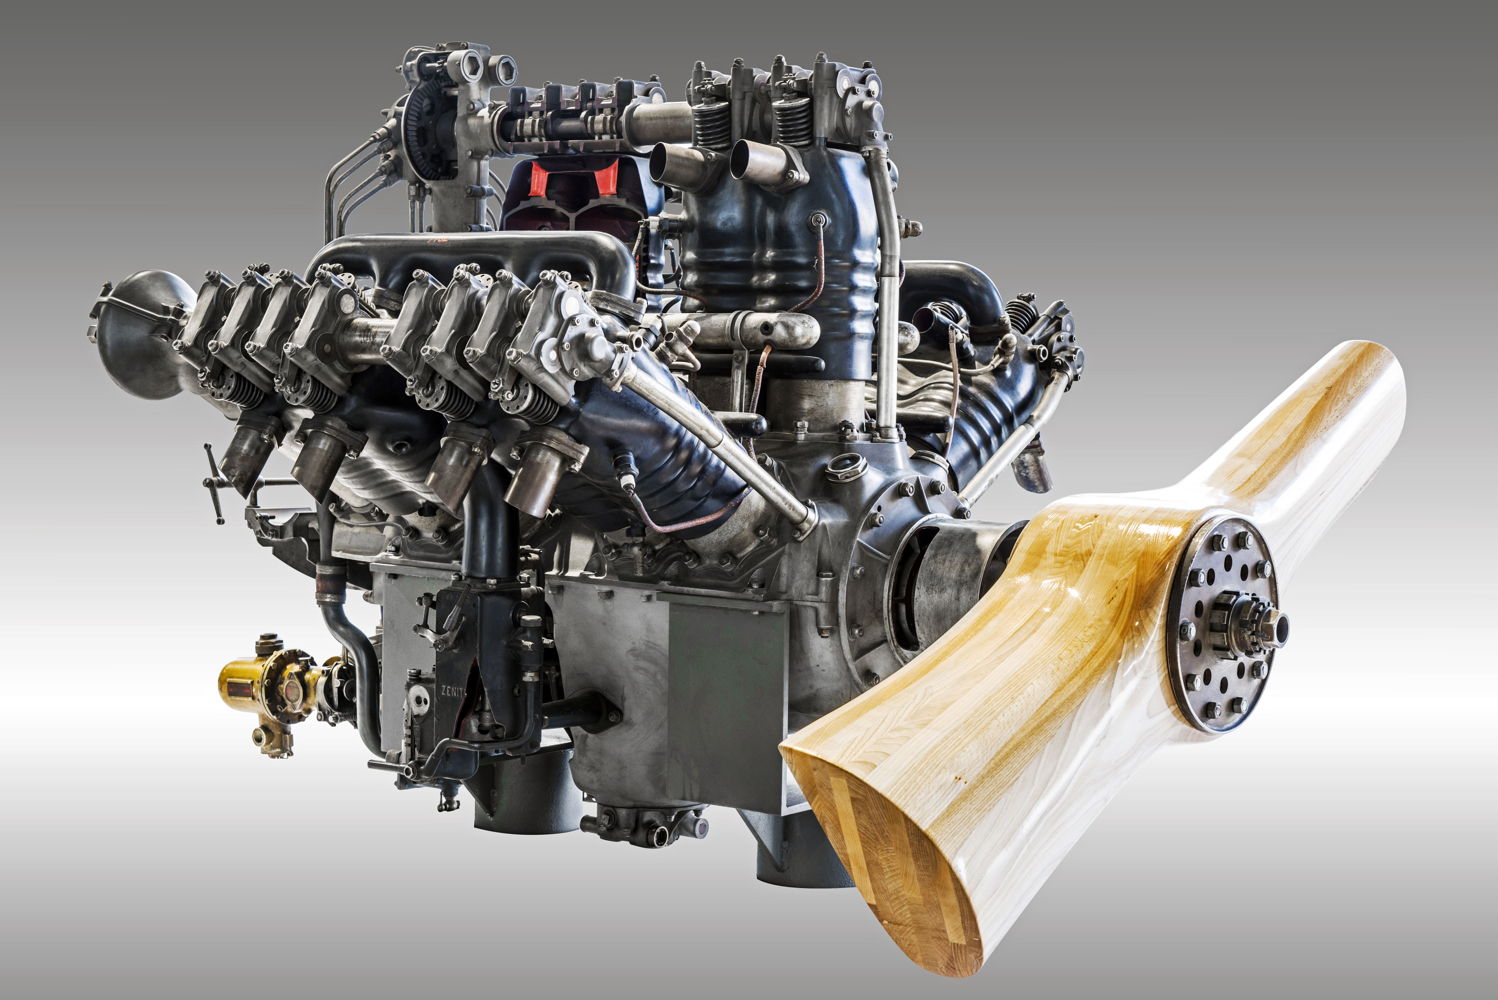 The impressive L&K Lorraine-Dietrich aircraft engine has a displacement of 24.4 litres, twelve cylinders in a W-configuration and reaches its maximum output of 450 hp at 1,850 rpm.